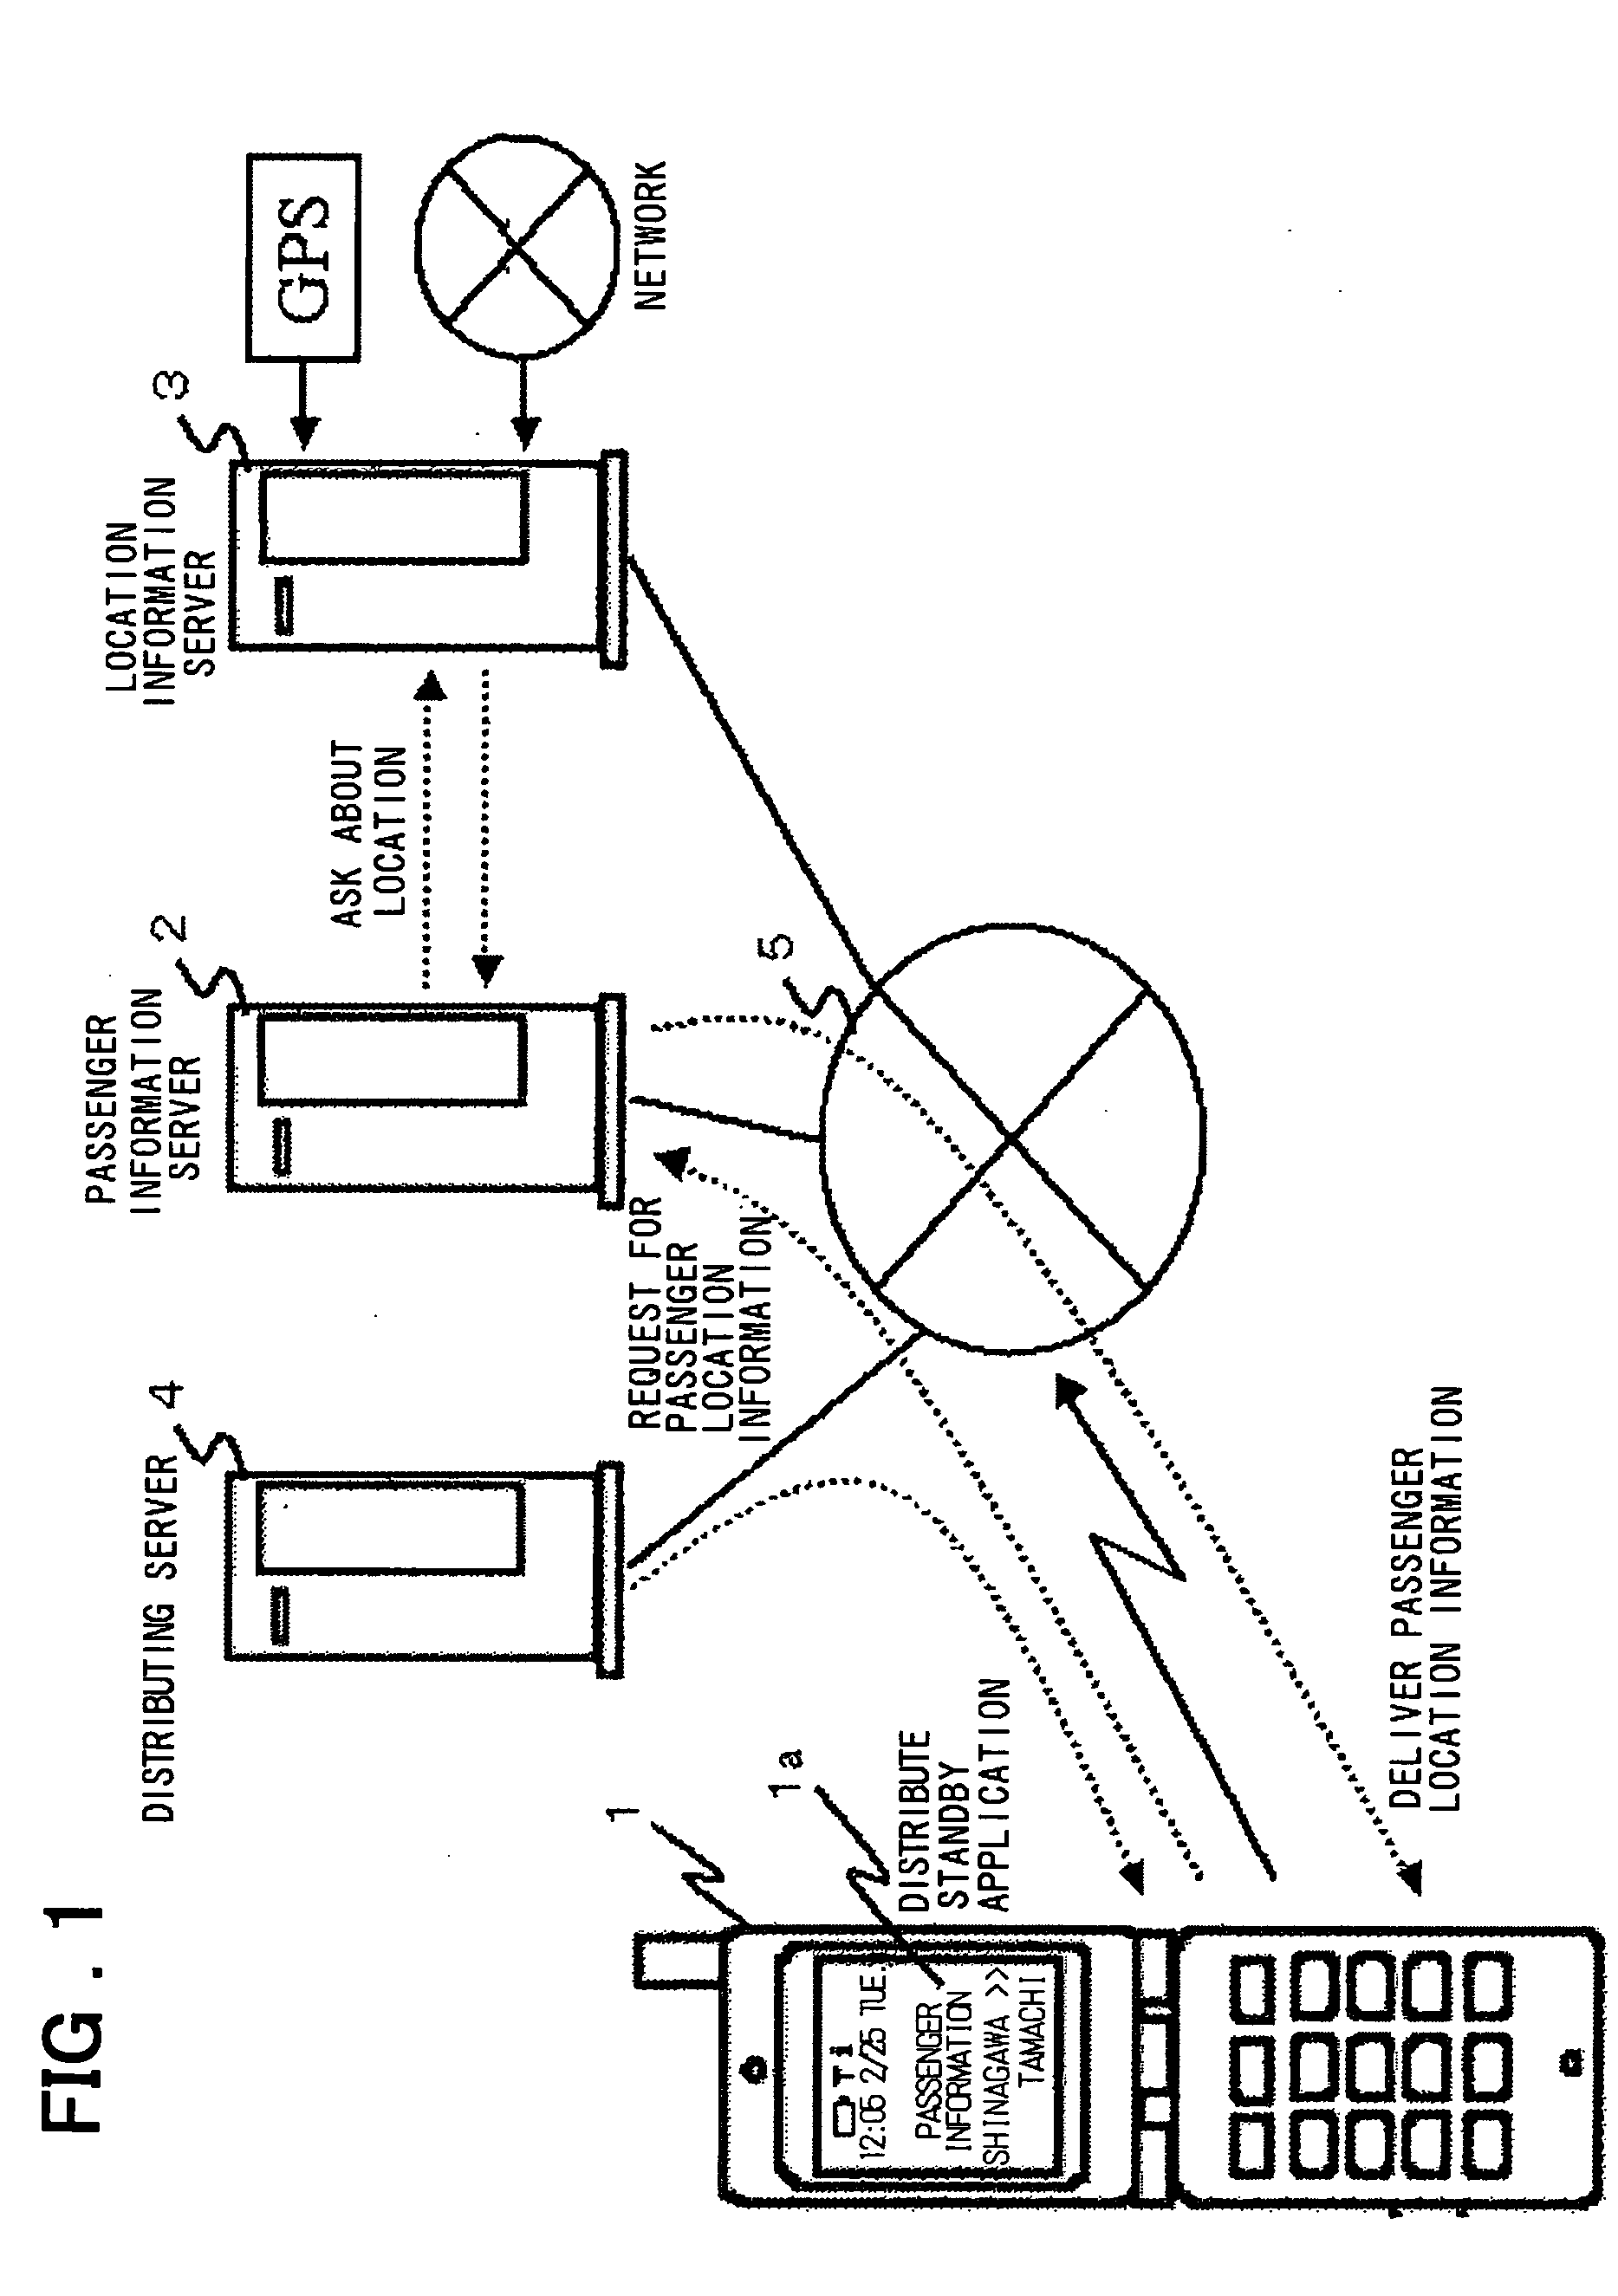 Passenger location information system, portable information terminal, and server